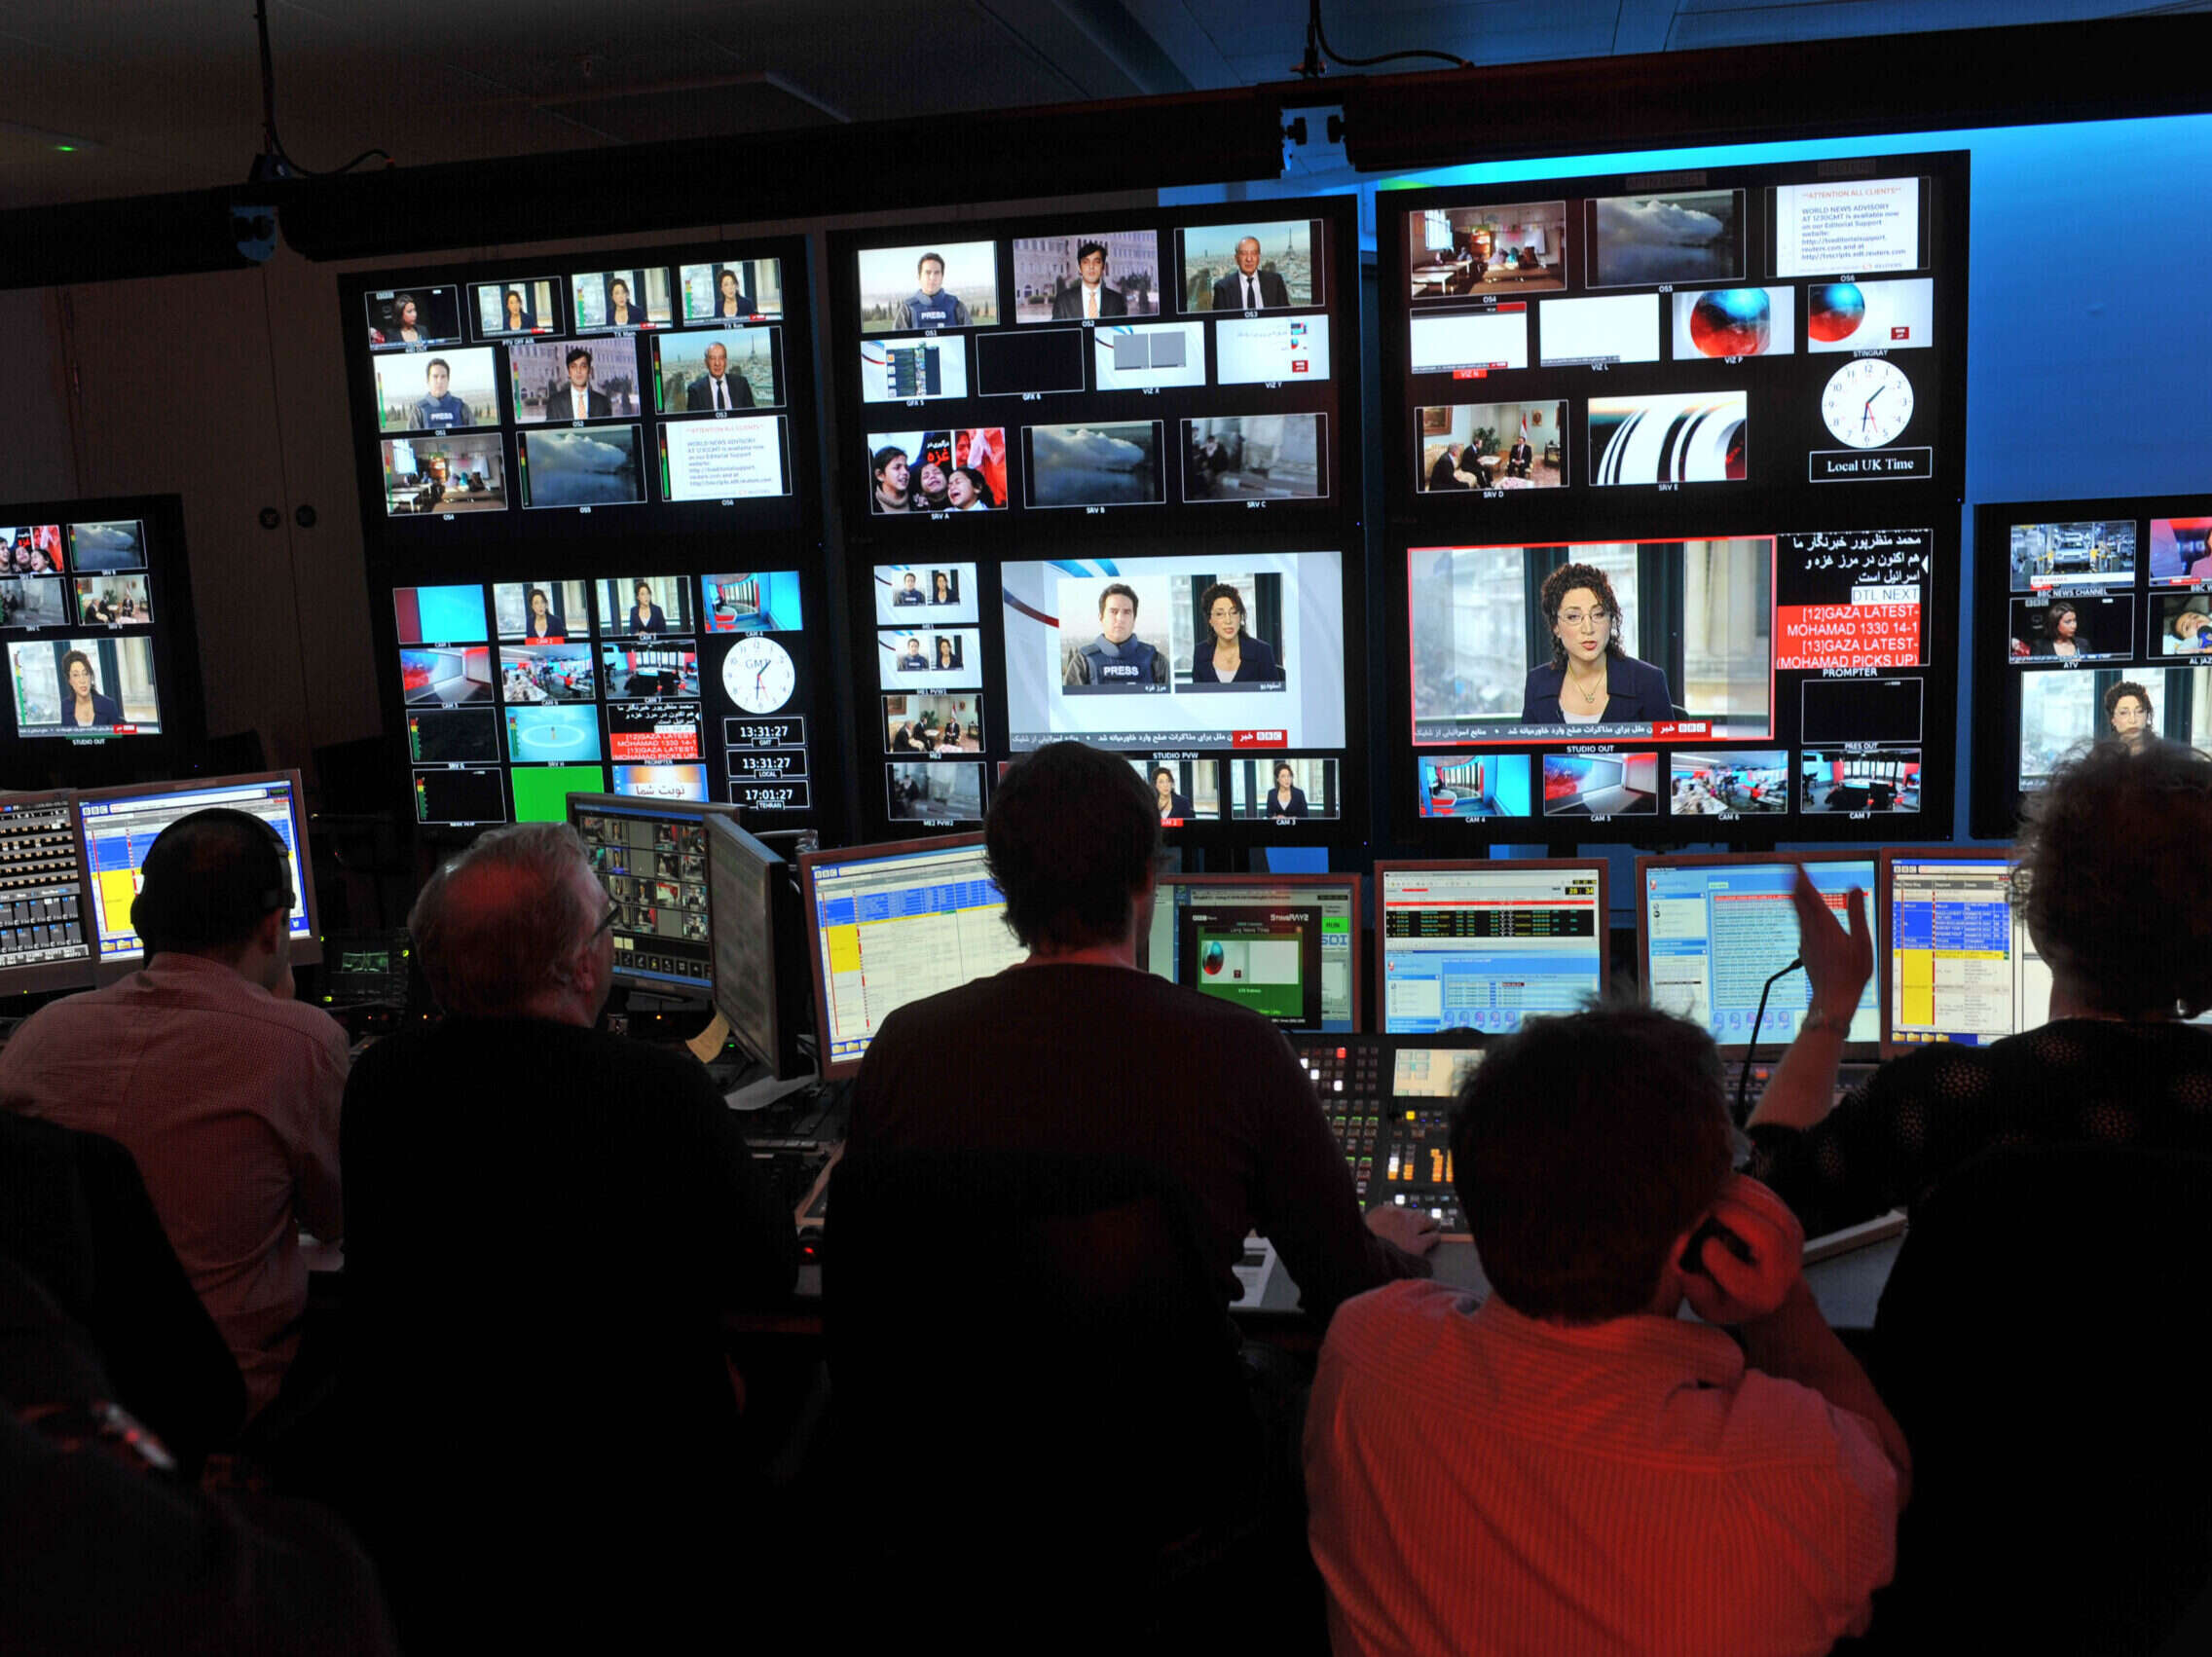 A picture from the BBC's Persian services, part of the World Service, which has seen major audience shrinkage according to the new annual report for 2022/2023